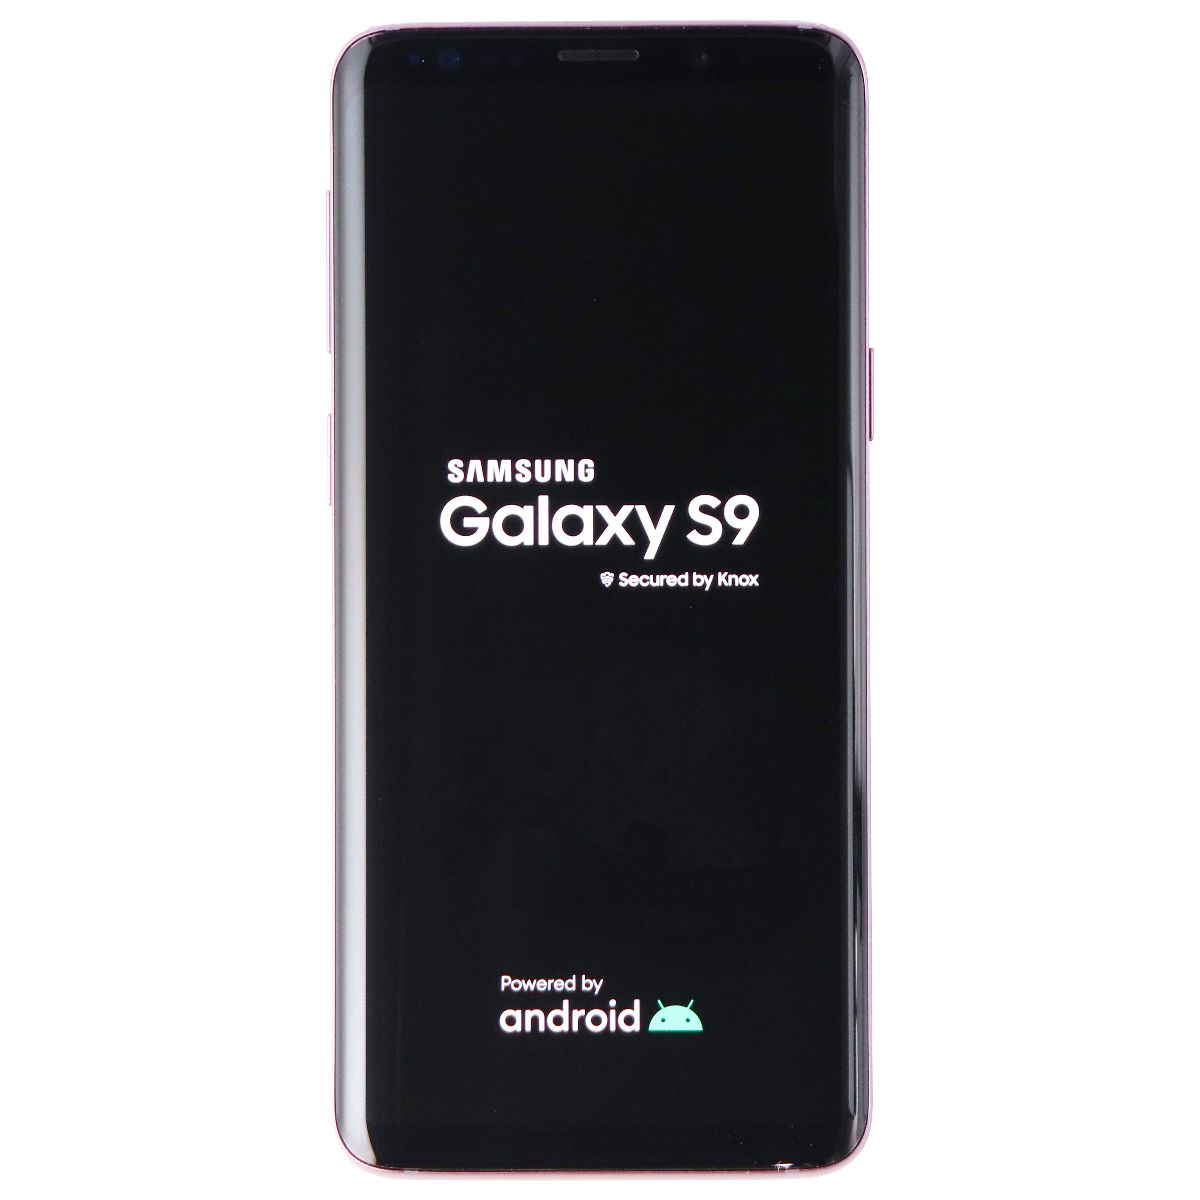 Samsung Galaxy S9 (5.8-in) Smartphone (SM-G960U) Unlocked - 64GB / Lilac Purple Cell Phones & Smartphones Samsung    - Simple Cell Bulk Wholesale Pricing - USA Seller